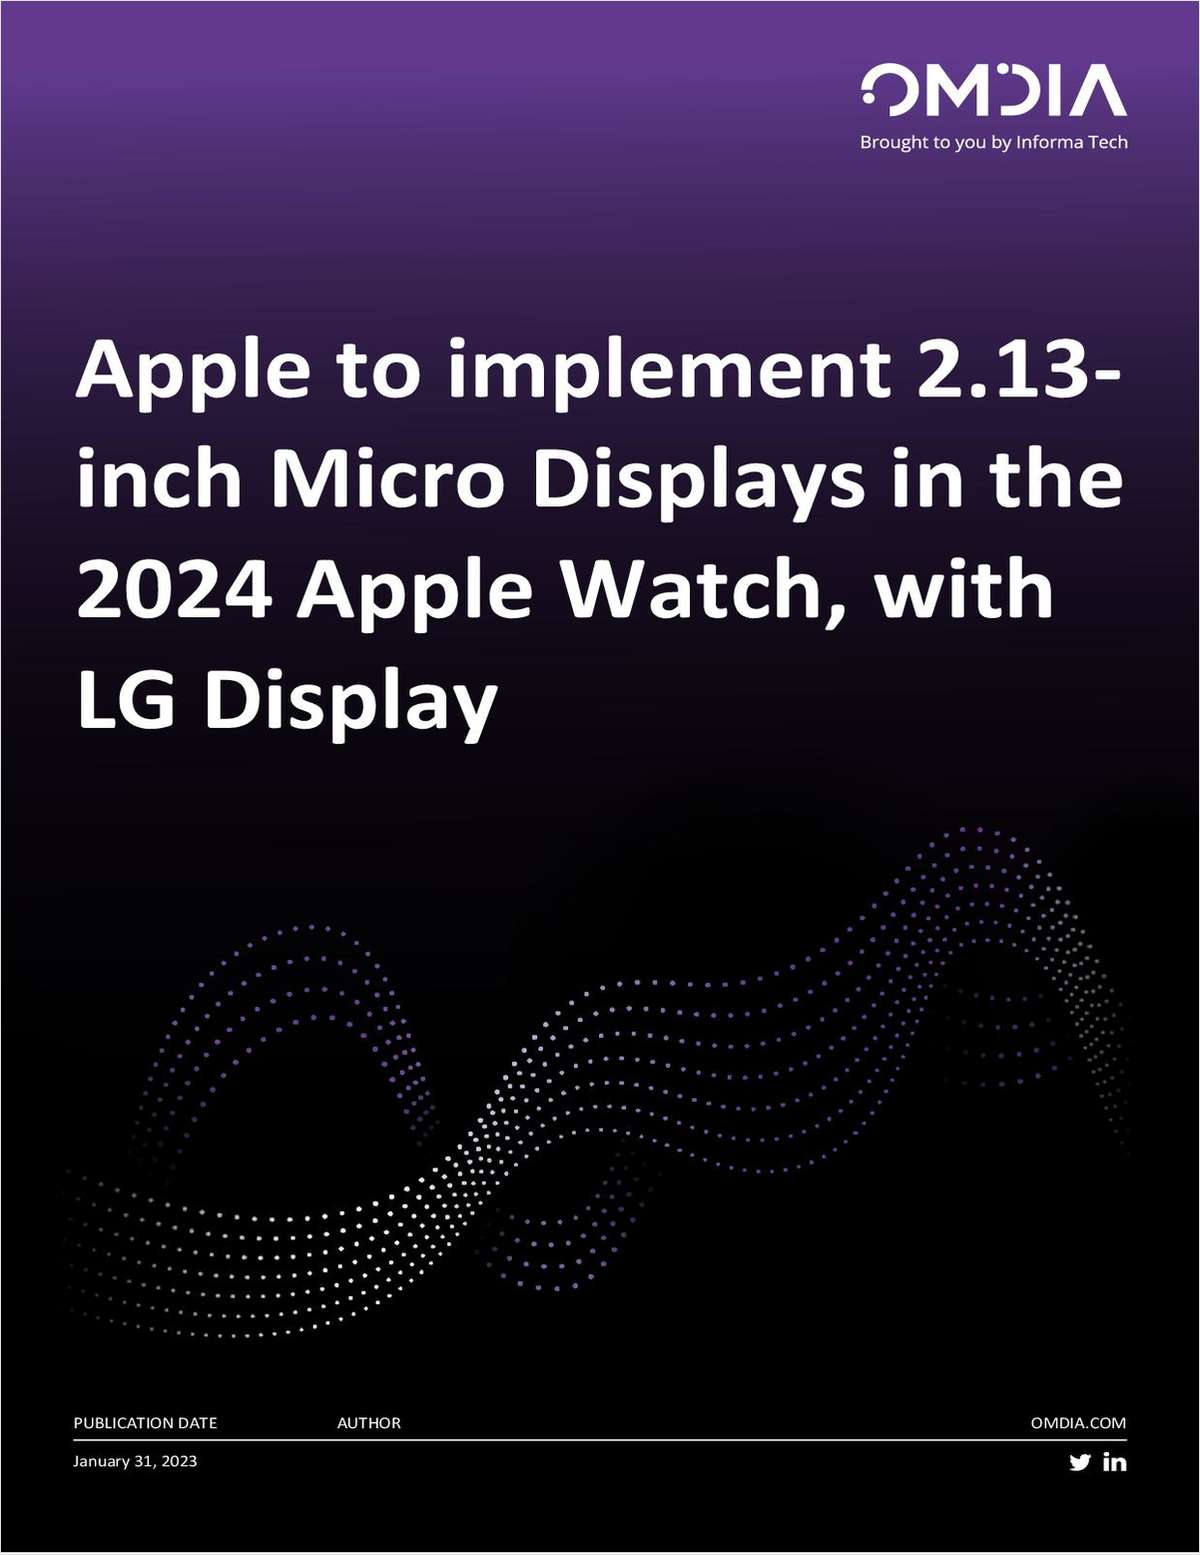 The 2024 Apple Watch, with LG Display